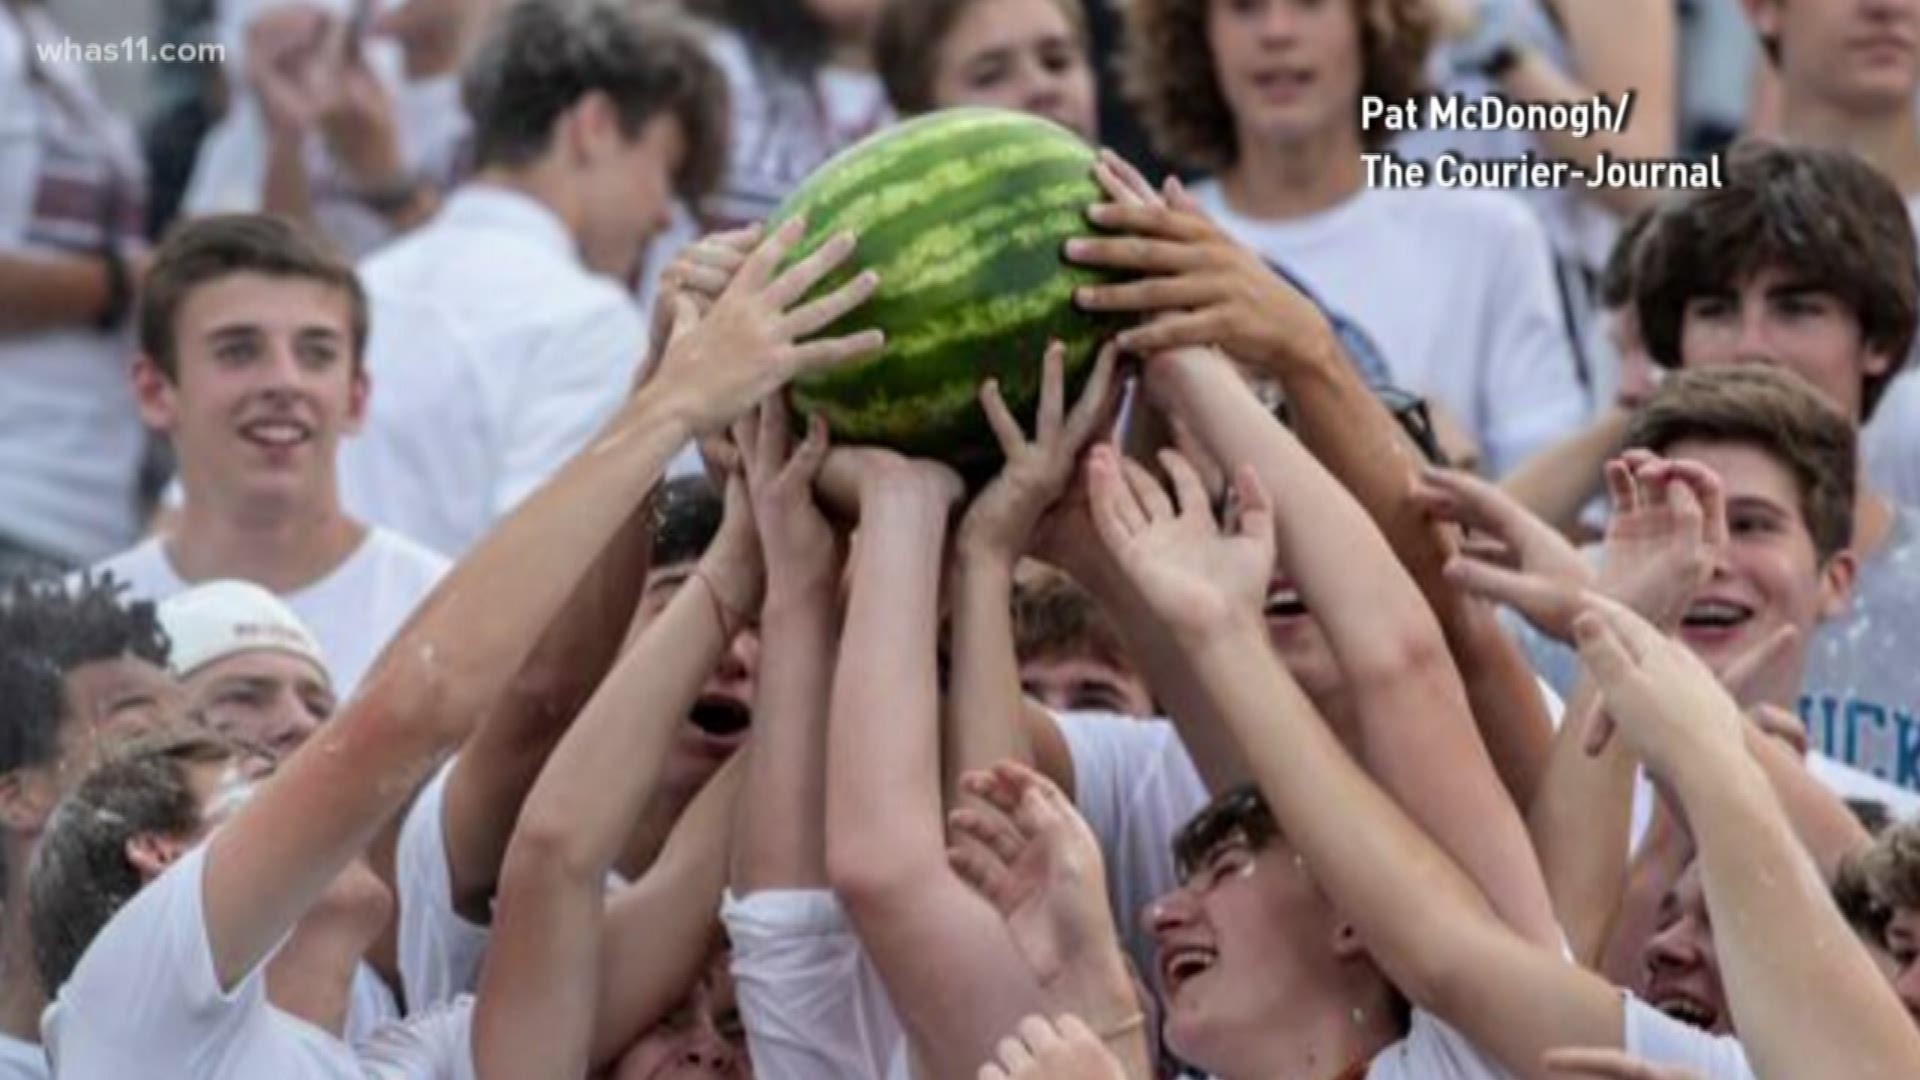 The group says there needs to be action from schools to address race relations in the fallout of Ballard students passing around a watermelon at a game against Central.